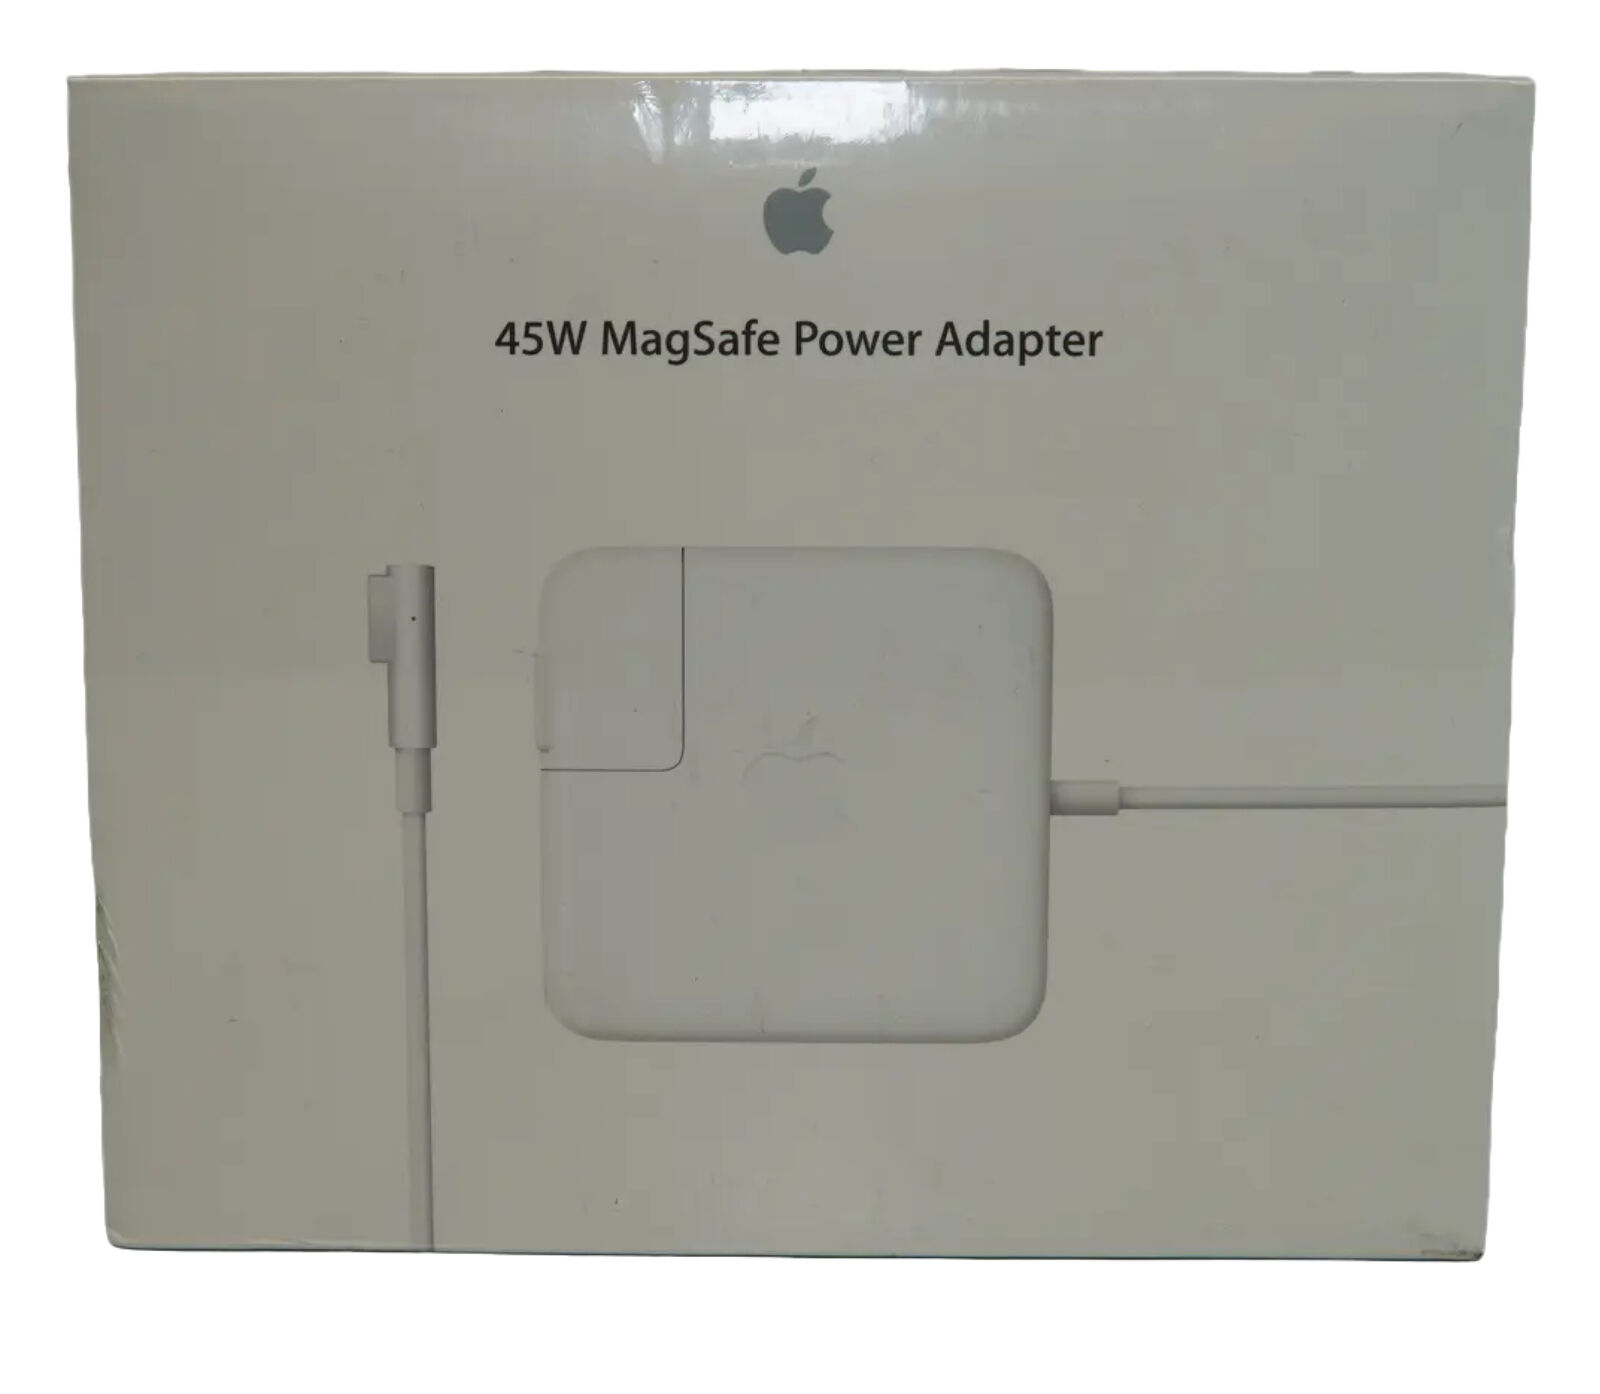 NEW Apple 45W MagSafe Power Adapter For MacBook Air MC747LL/A